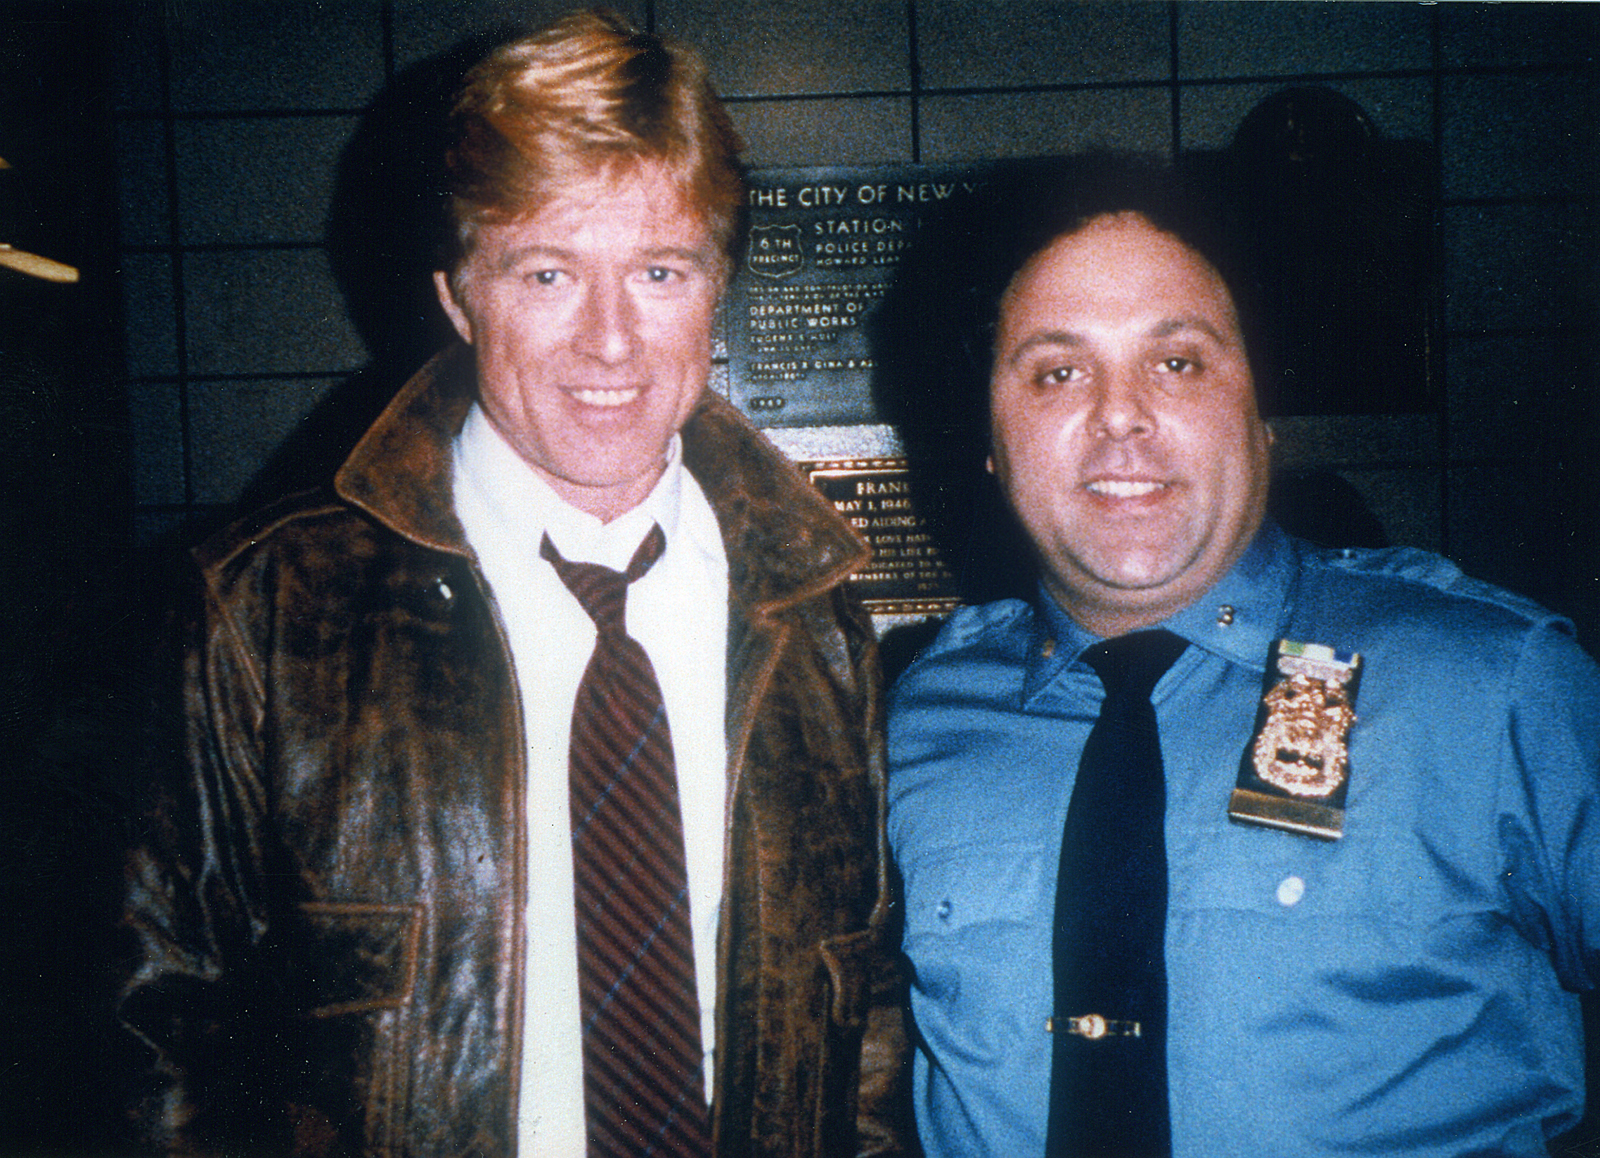 Frank Patton with Robert Redford in 